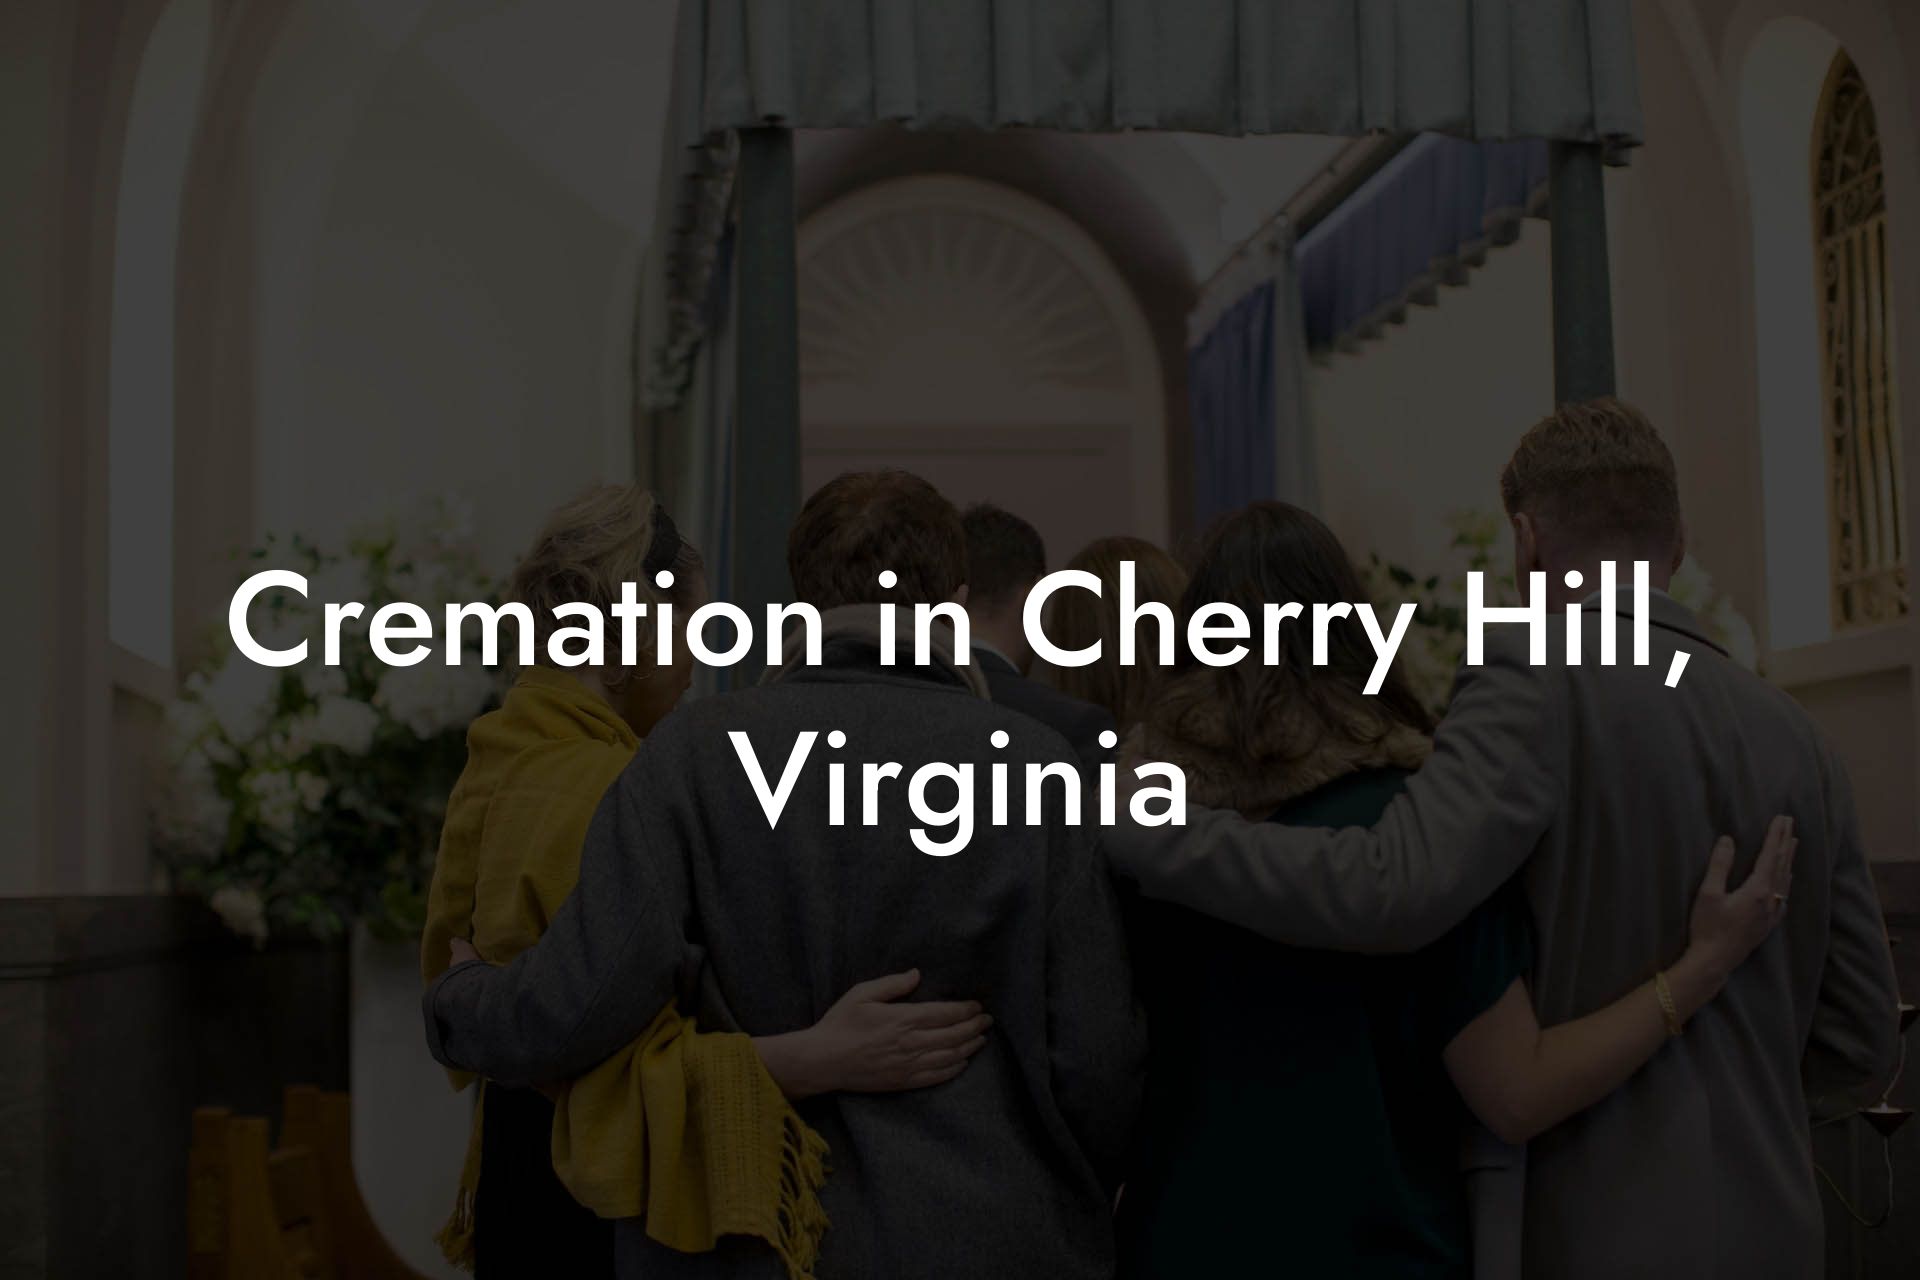 Cremation in Cherry Hill, Virginia